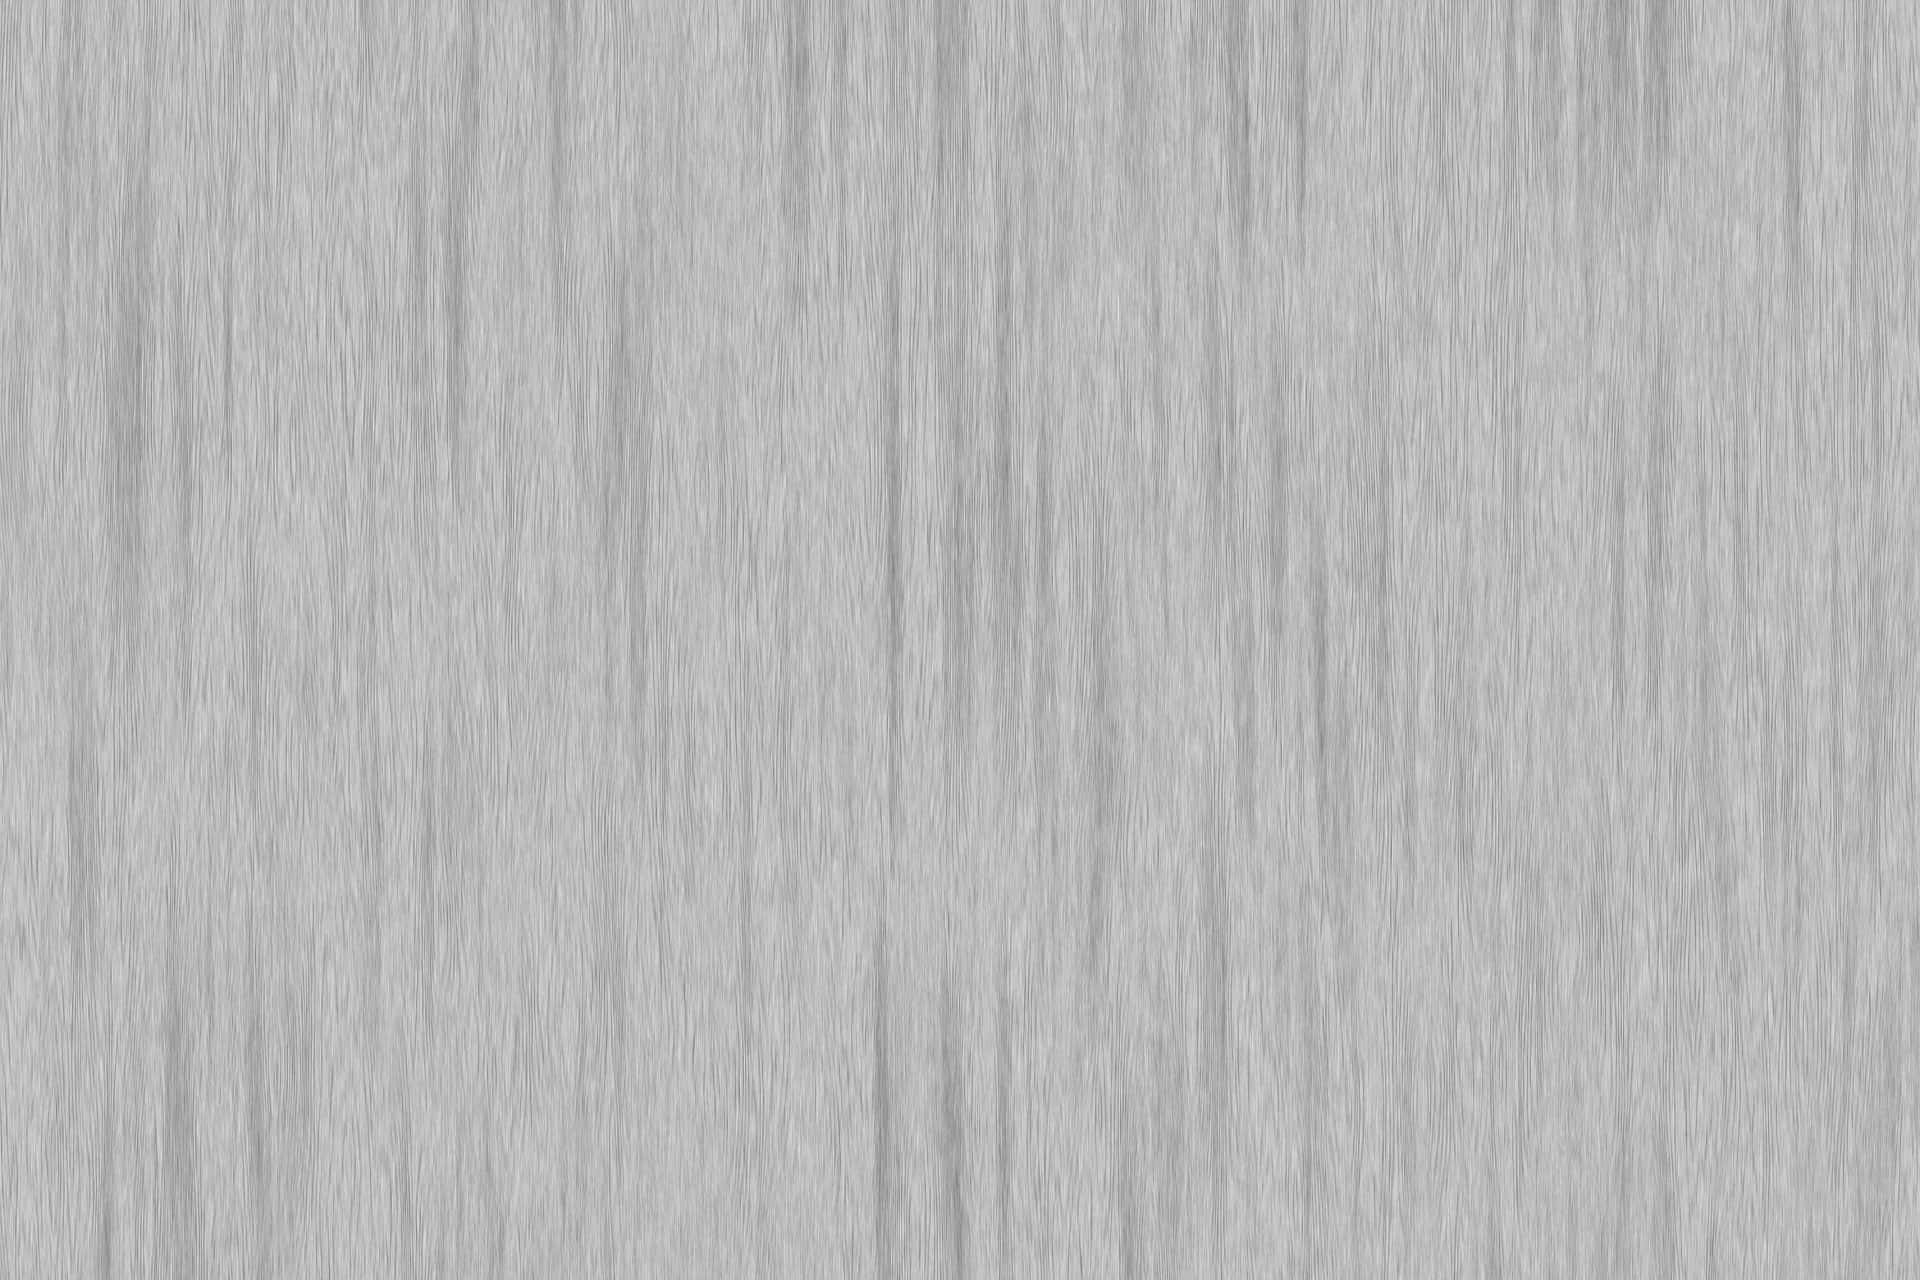 Luxurious Gray Wood Background